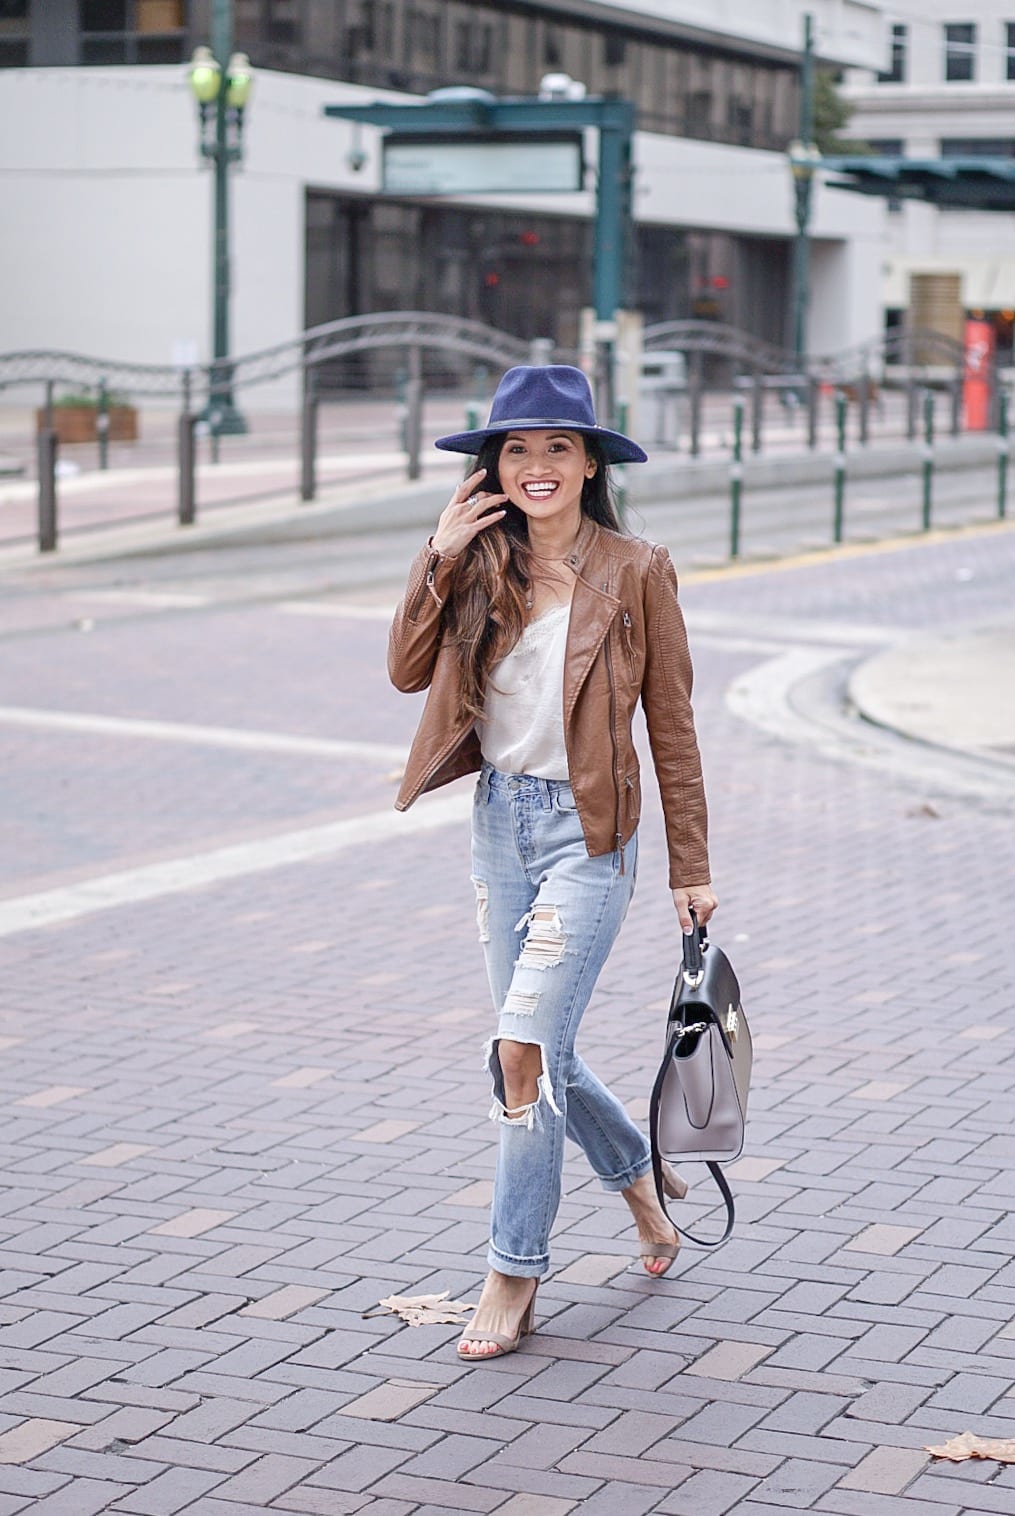 leather jacket, brown leather jacket, moto leather jacket, mom jeans, distressed jeans, navy felt hat, Steve Madden Carson sandal, white lace cami, Zac Zac Posen bag, spring outfit 